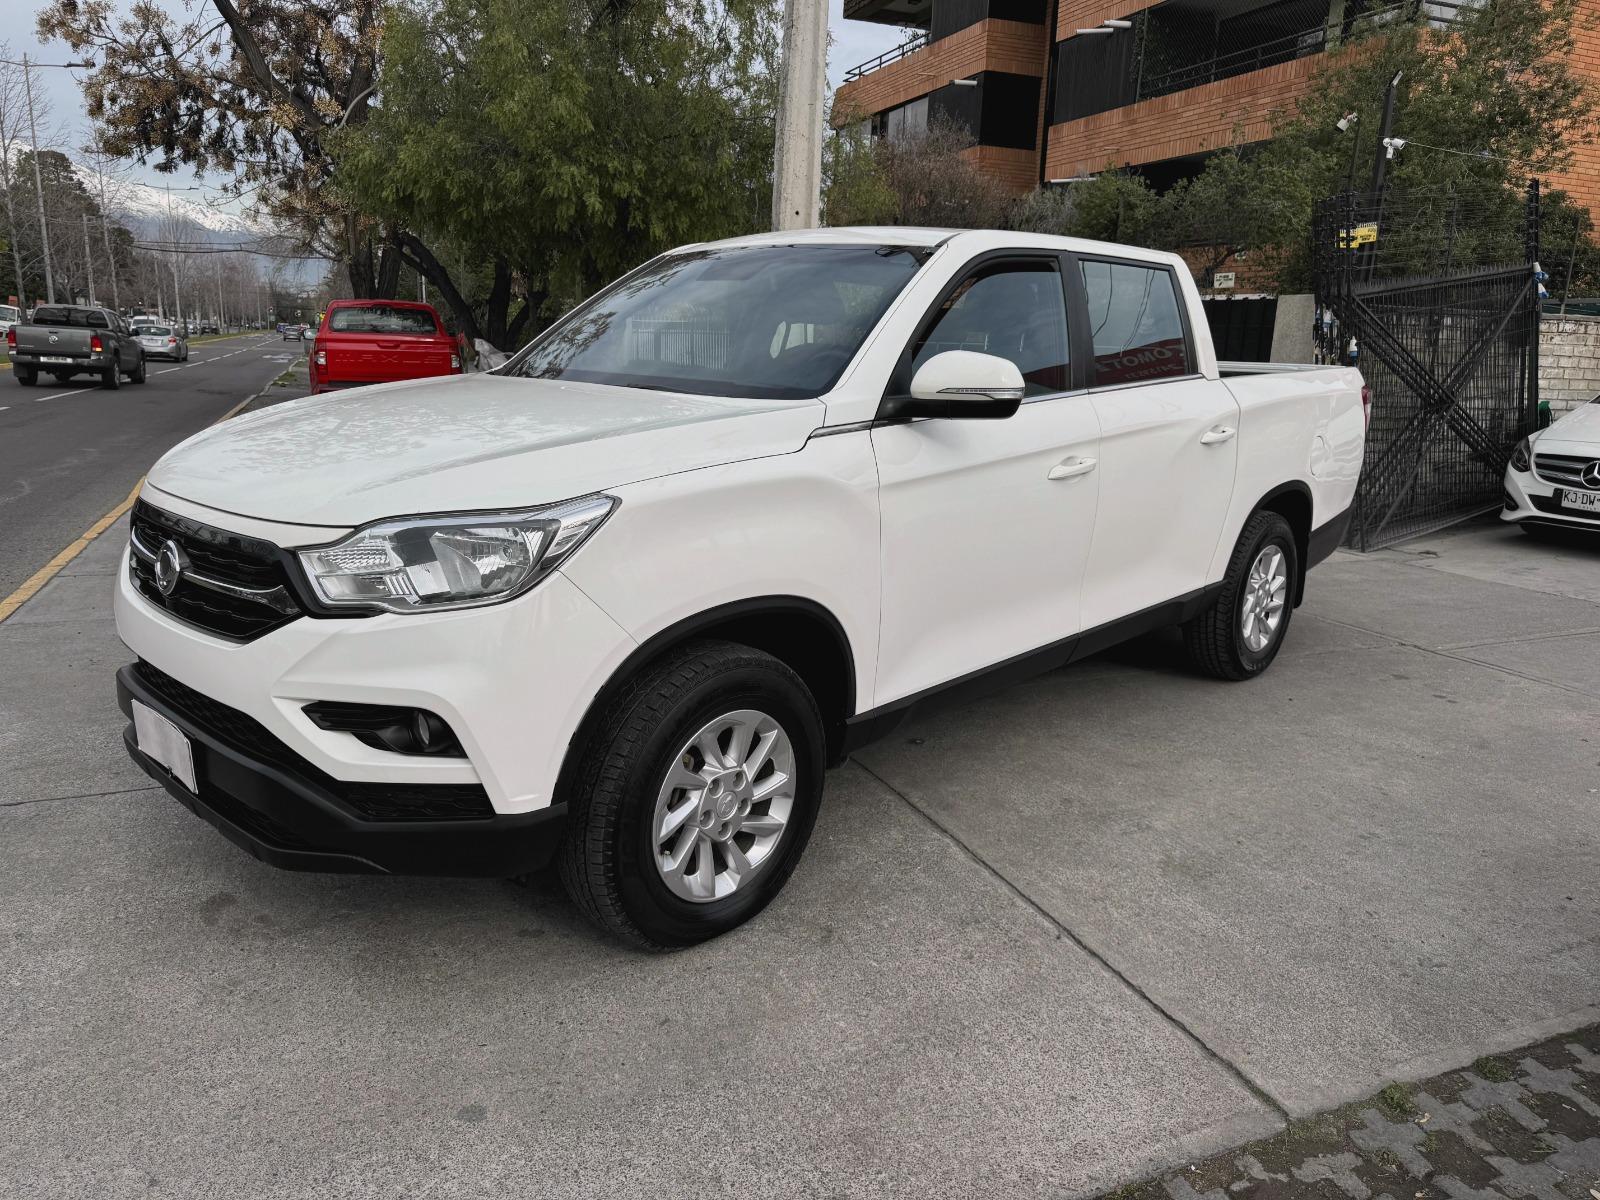 SSANGYONG MUSSO GLX 2.2 AUTOMATICA 2021 FULL AIRE AIRBAG ABS - 